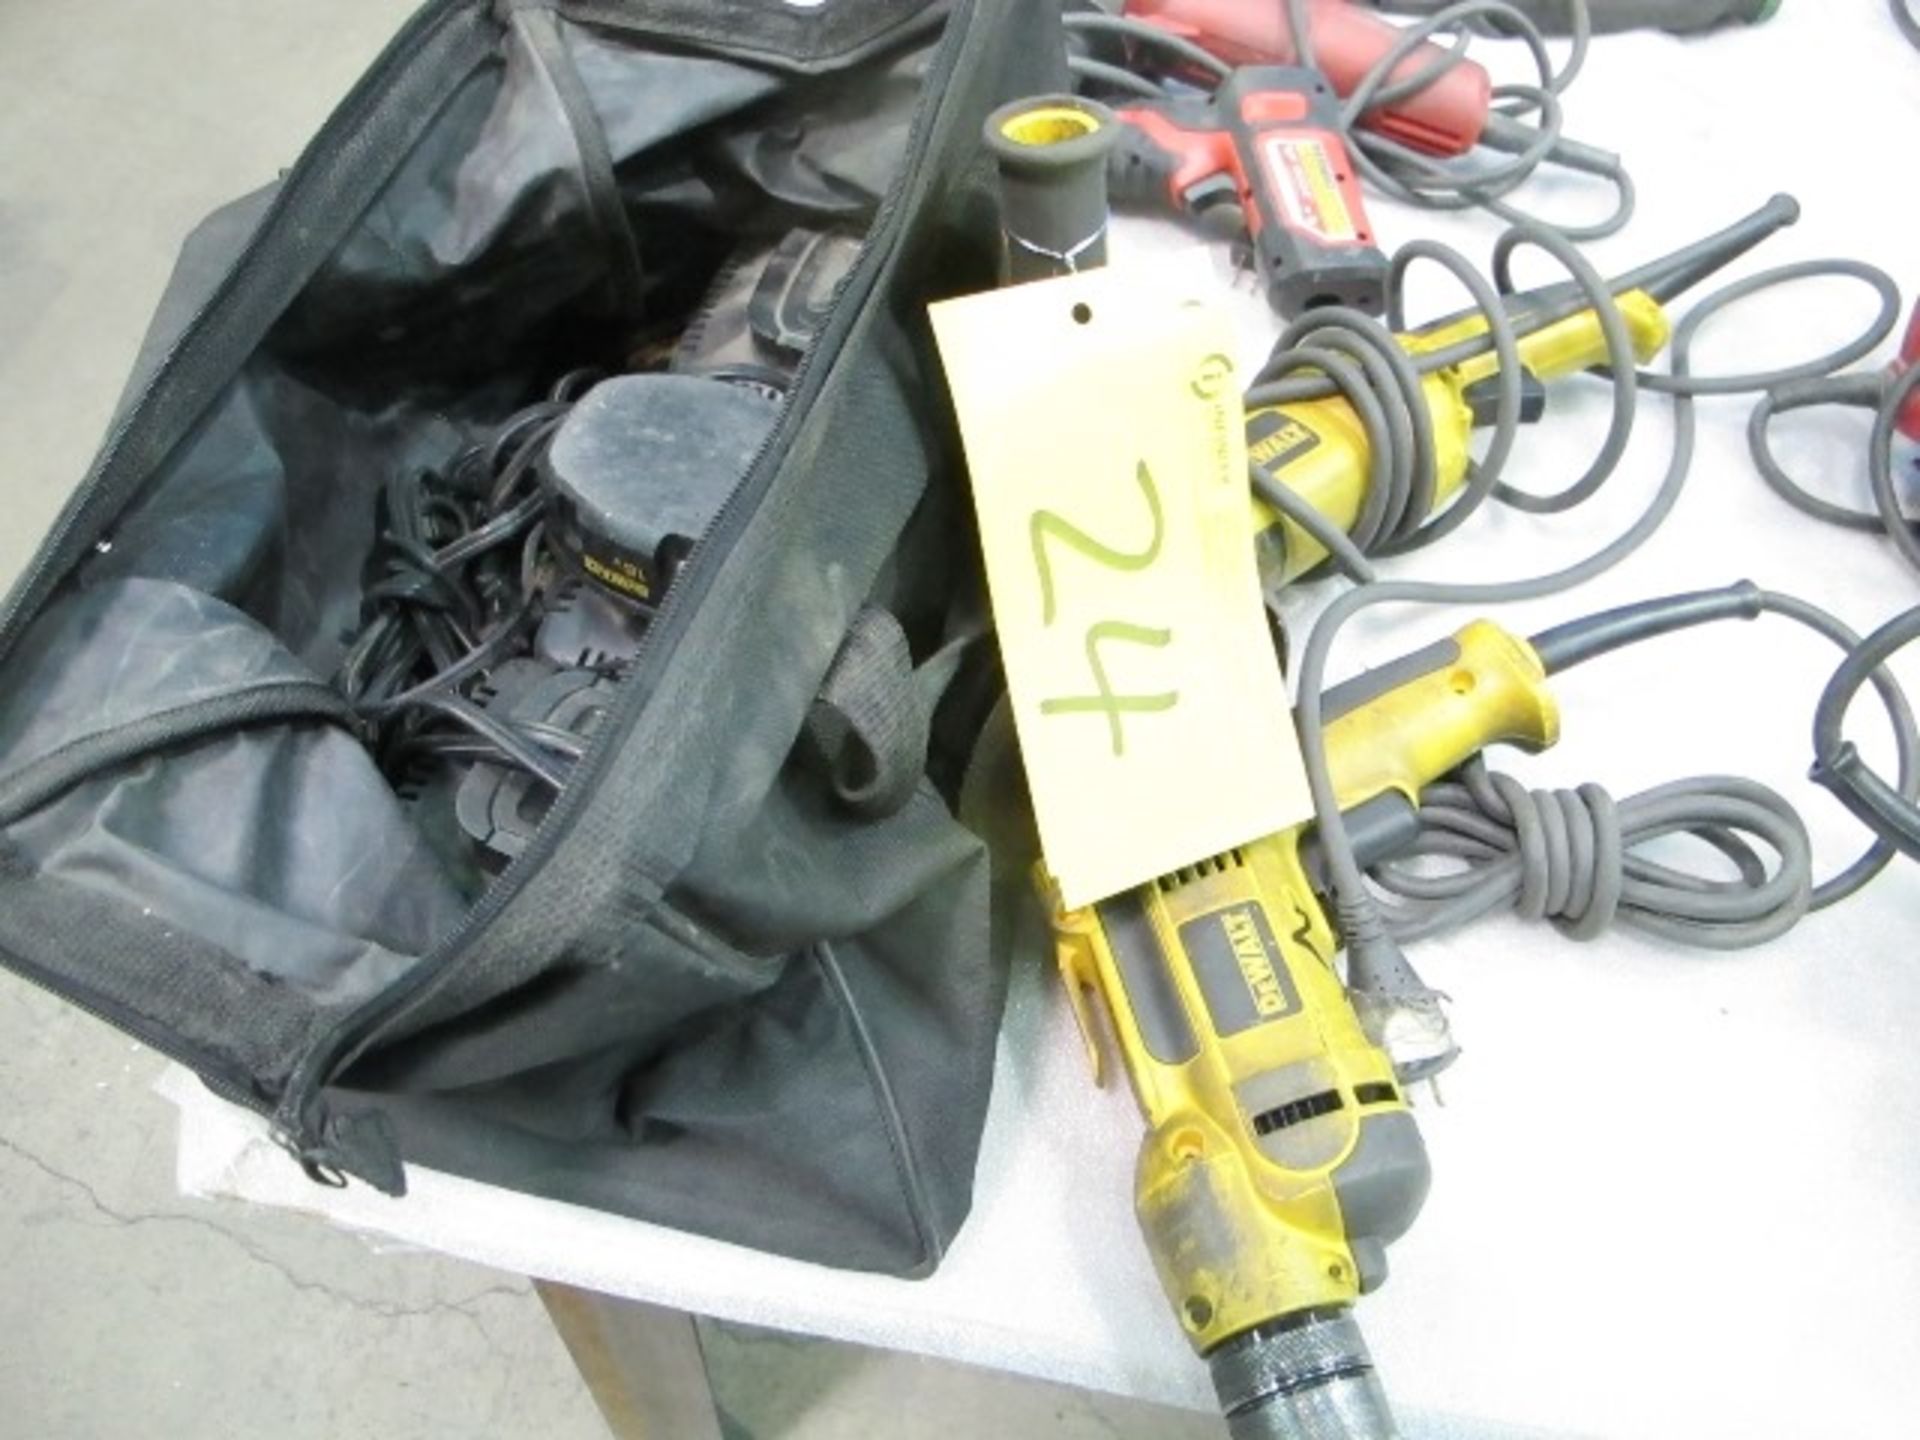 DEWALT 4 1/2" ANGLE GRINDER, HEAVY DUTY POWER DRILL, BAY WITH 3 CHARGERS AND 18 VOLT BATTERY